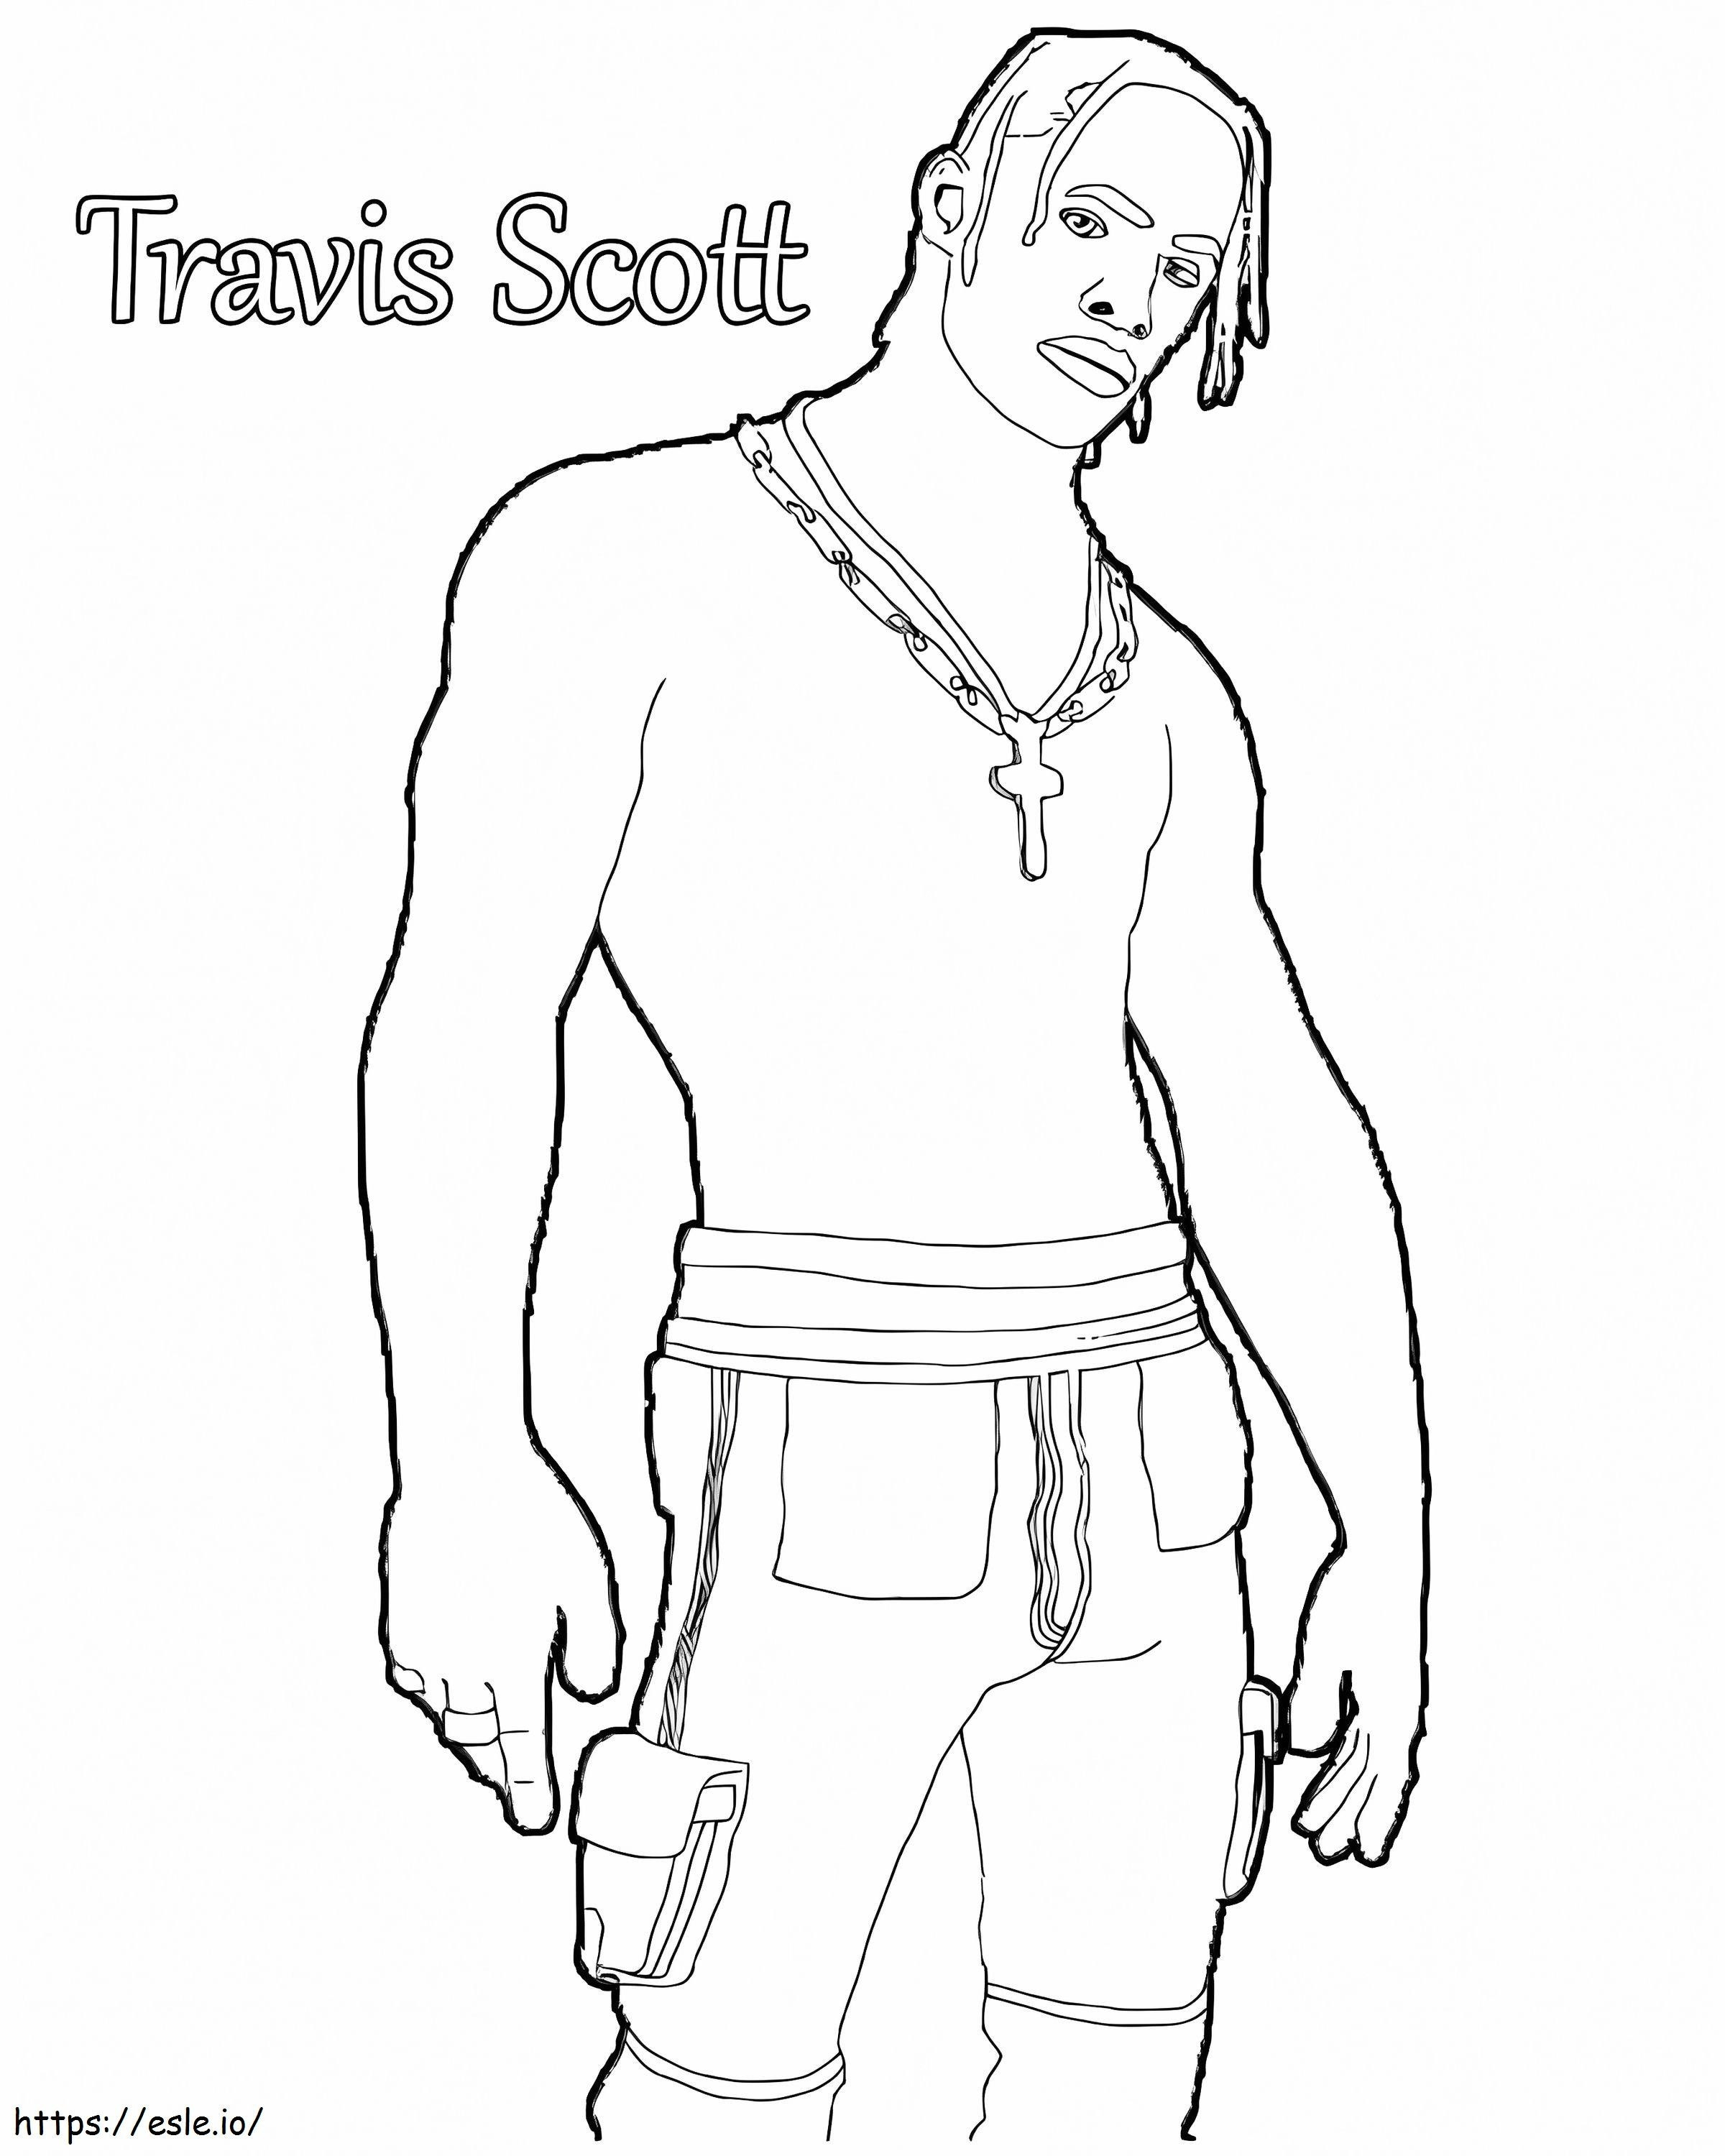 Cool Travis Scott coloring page